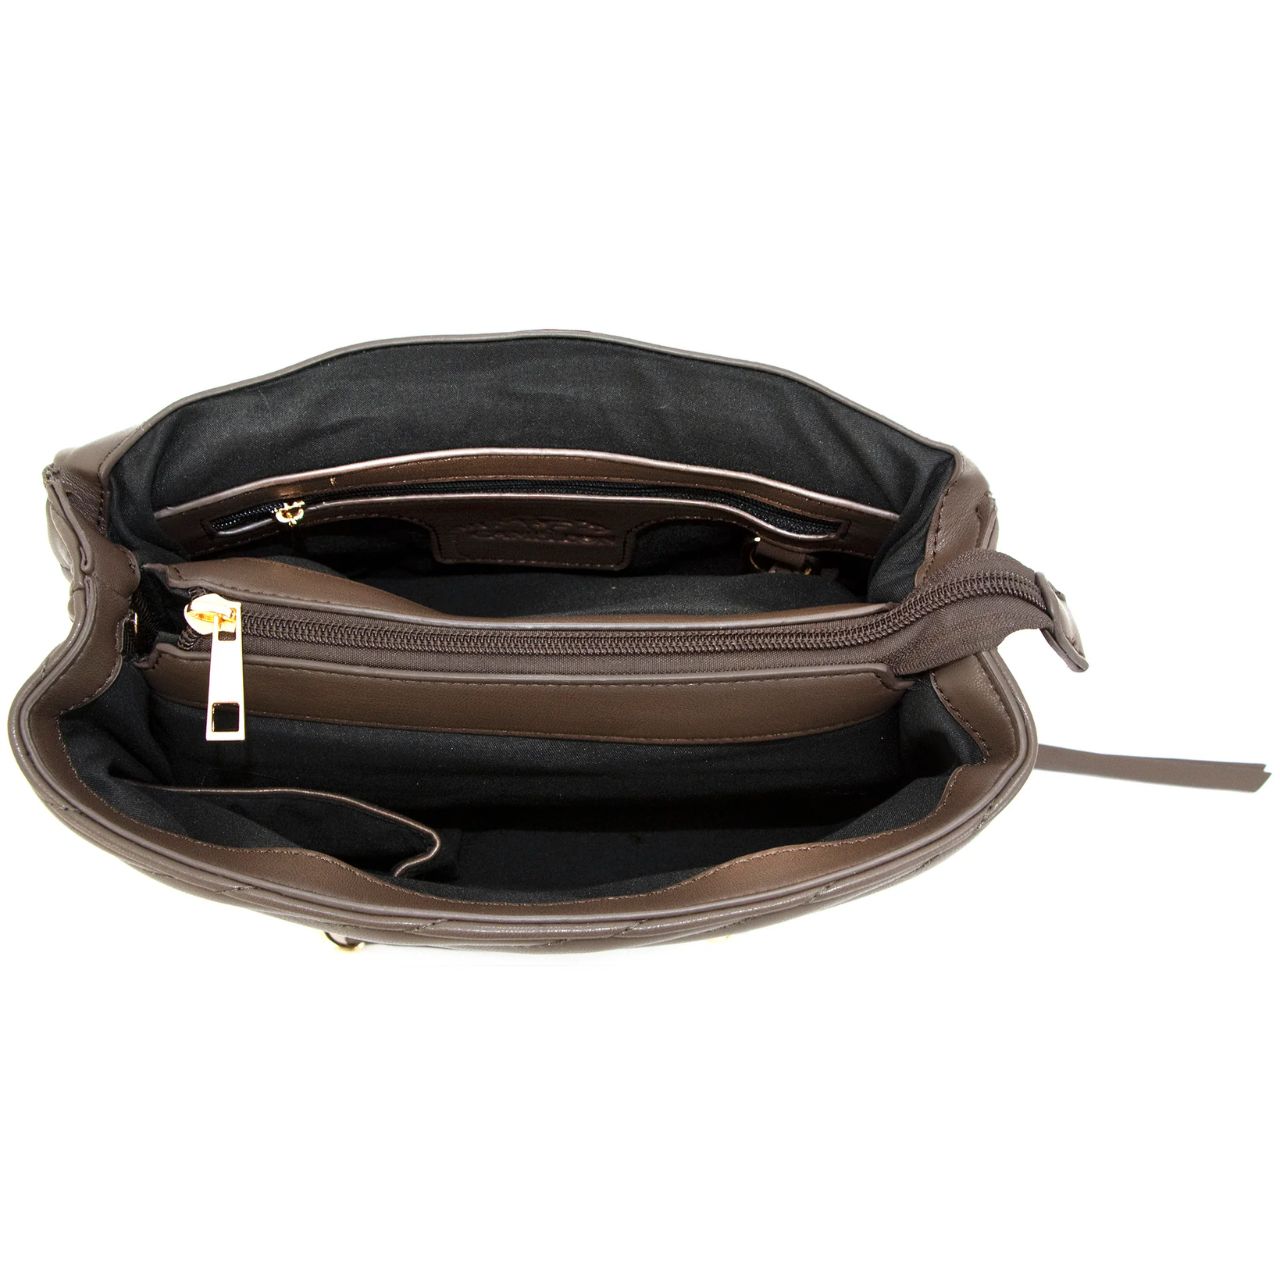 inside of brown concealed carry purse